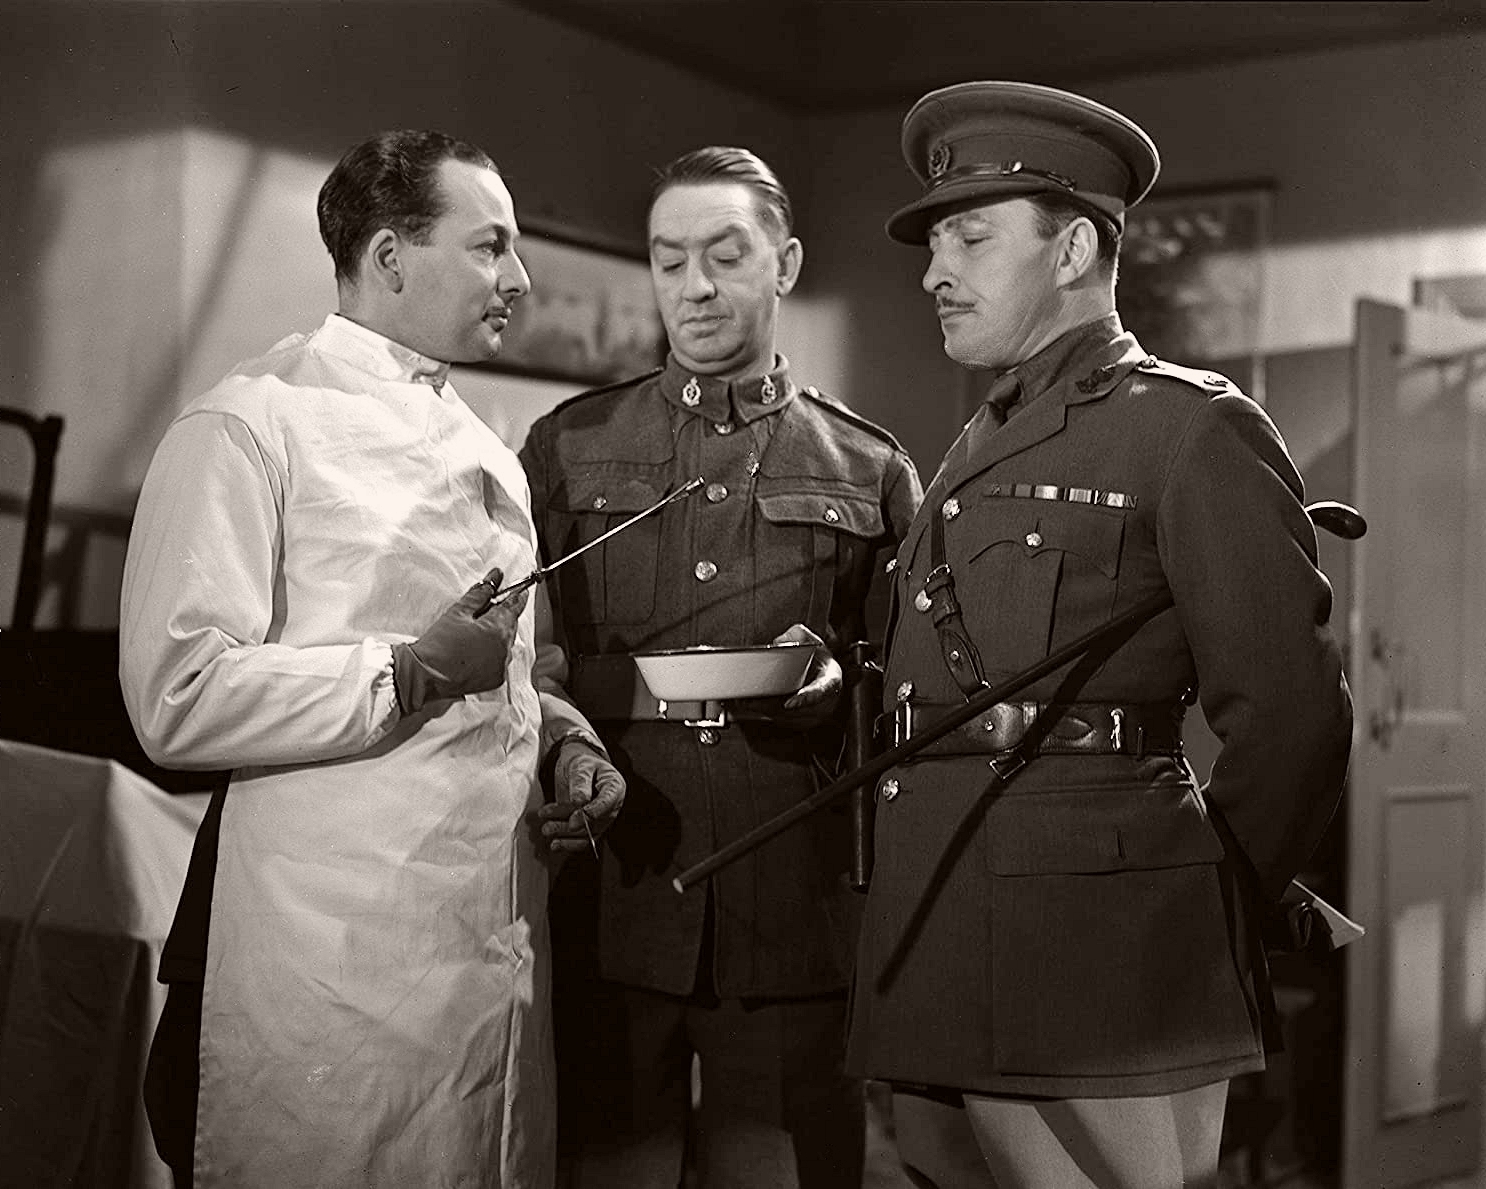 Photograph of The High Command (1937) (1). Leslie Perrins, Allan Jeayes, Lionel Atwill